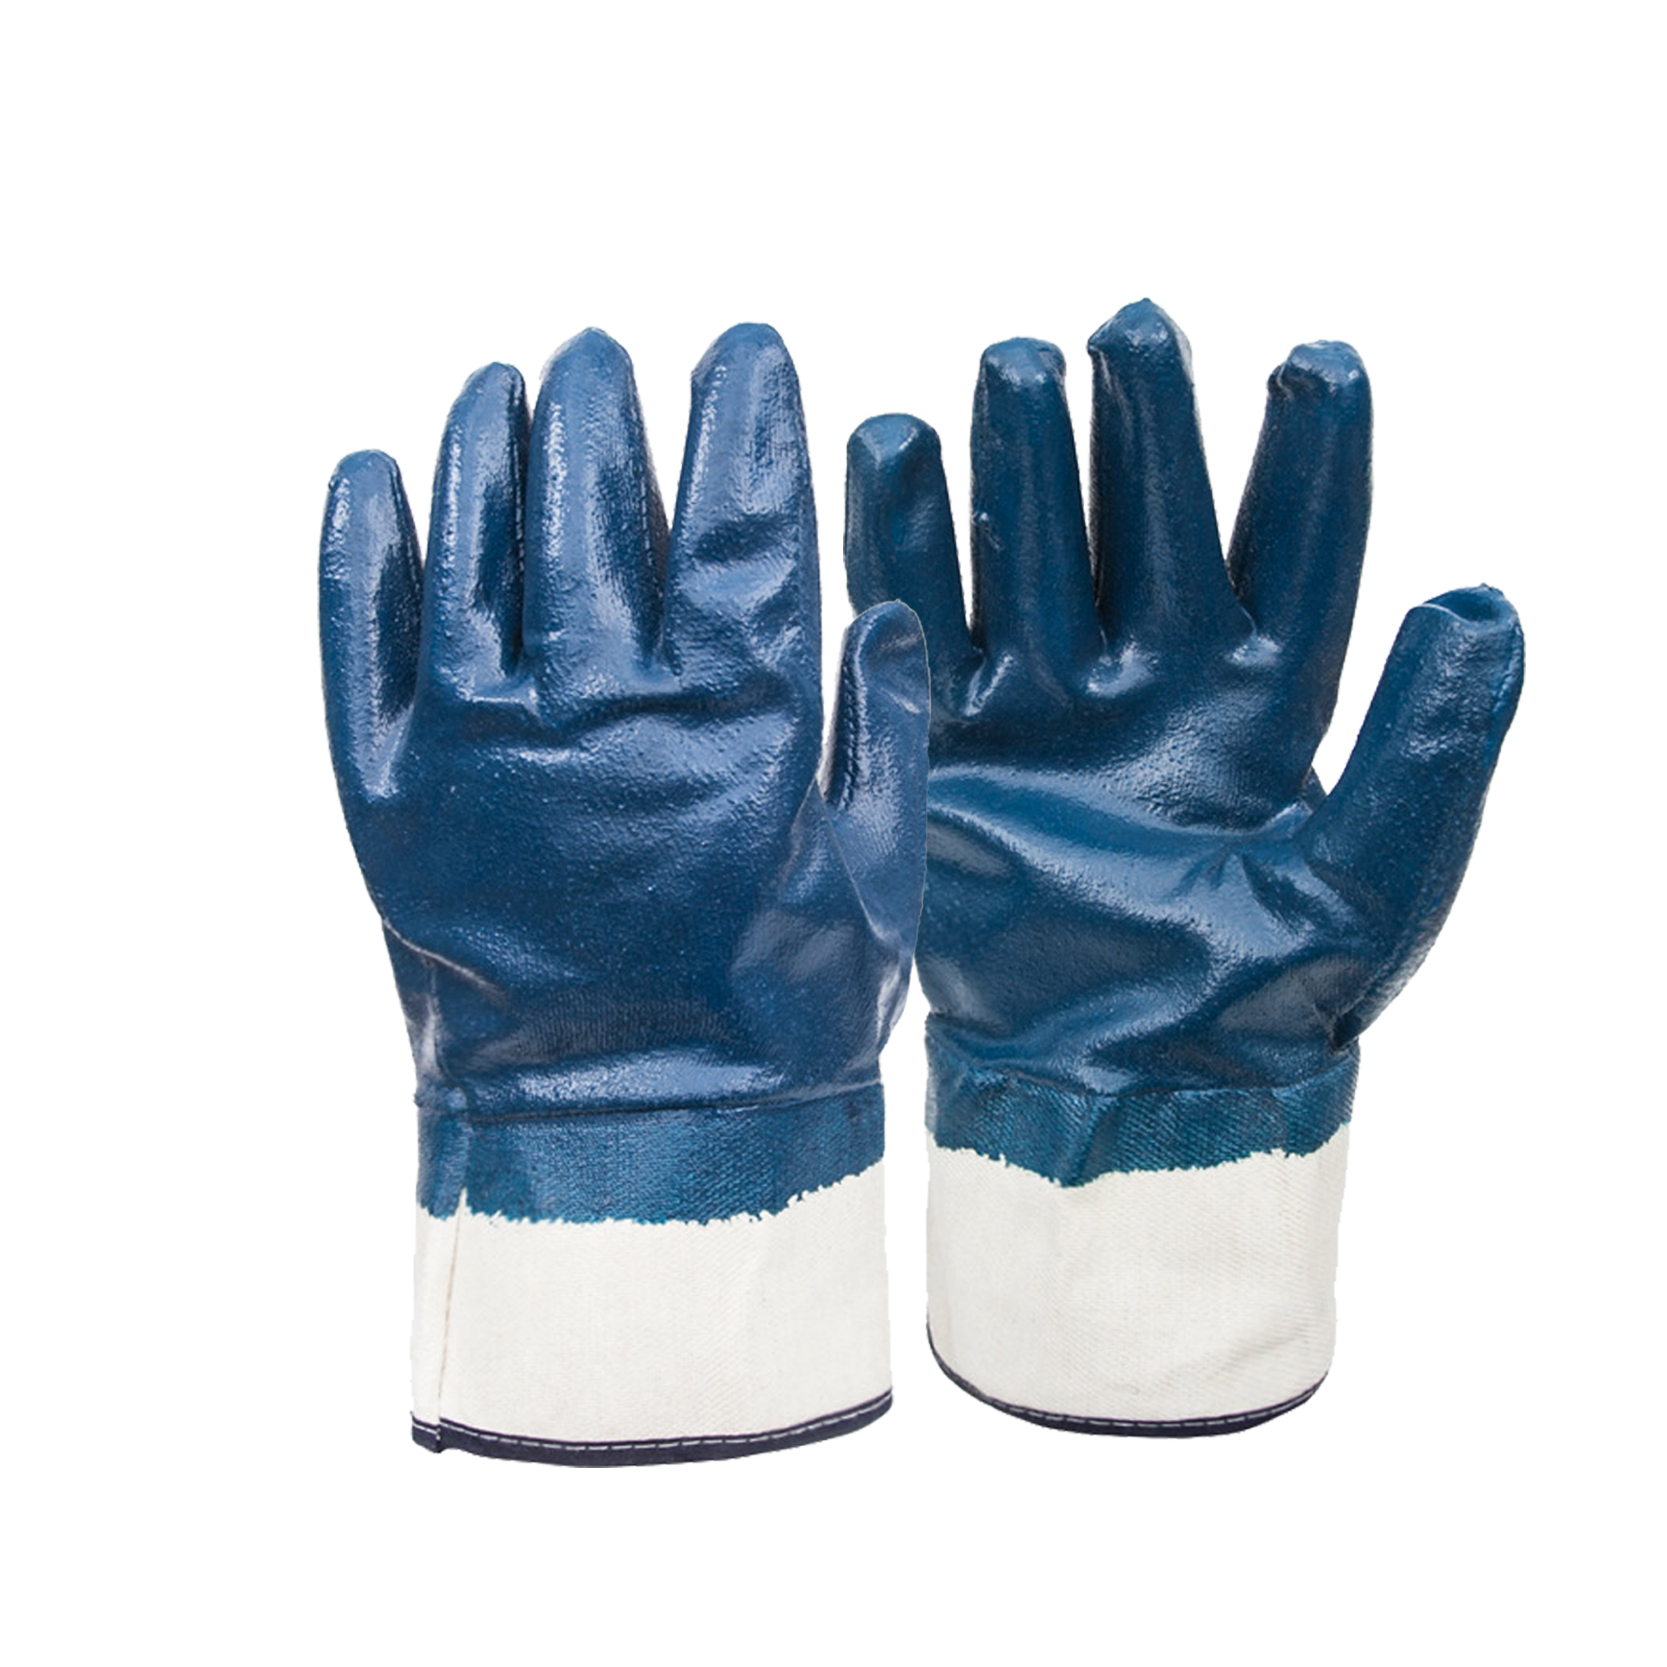 Heavy Weight Fully Coated Nitrile Gloves Safety Work Gloves